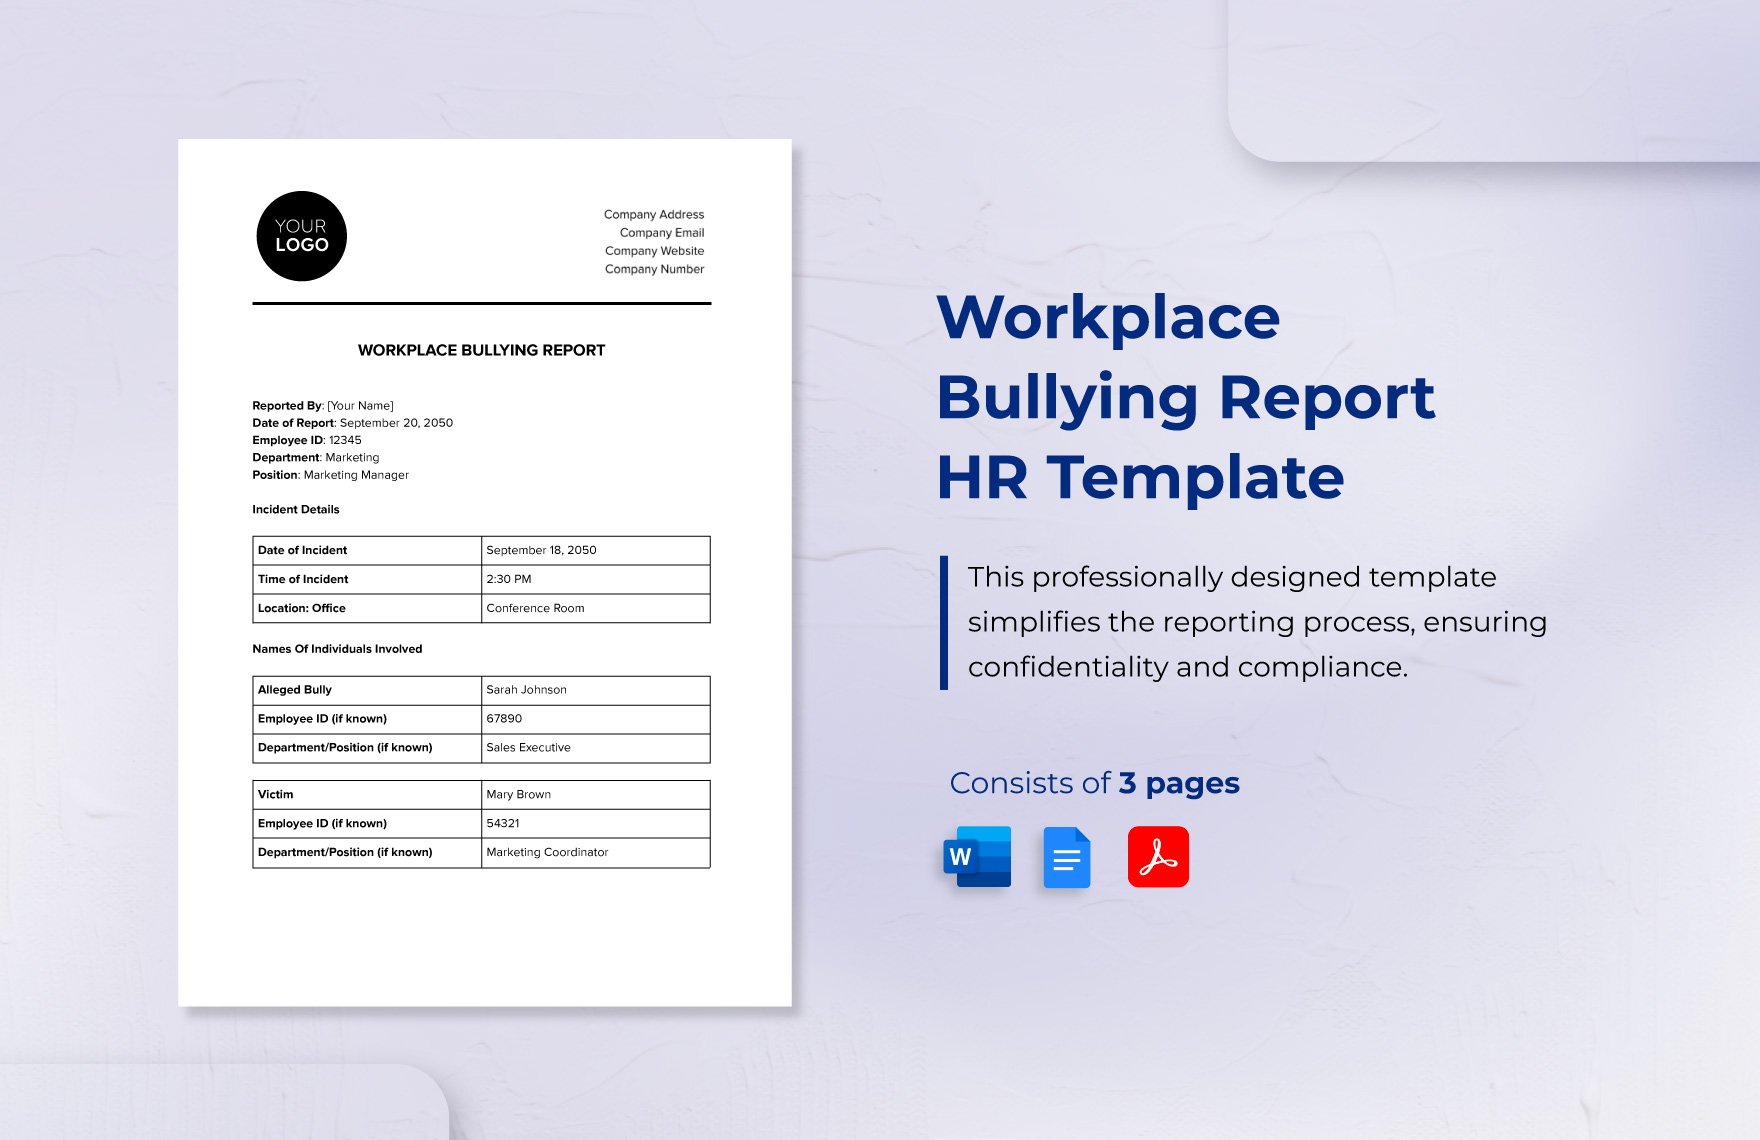 Workplace Bullying Report HR Template